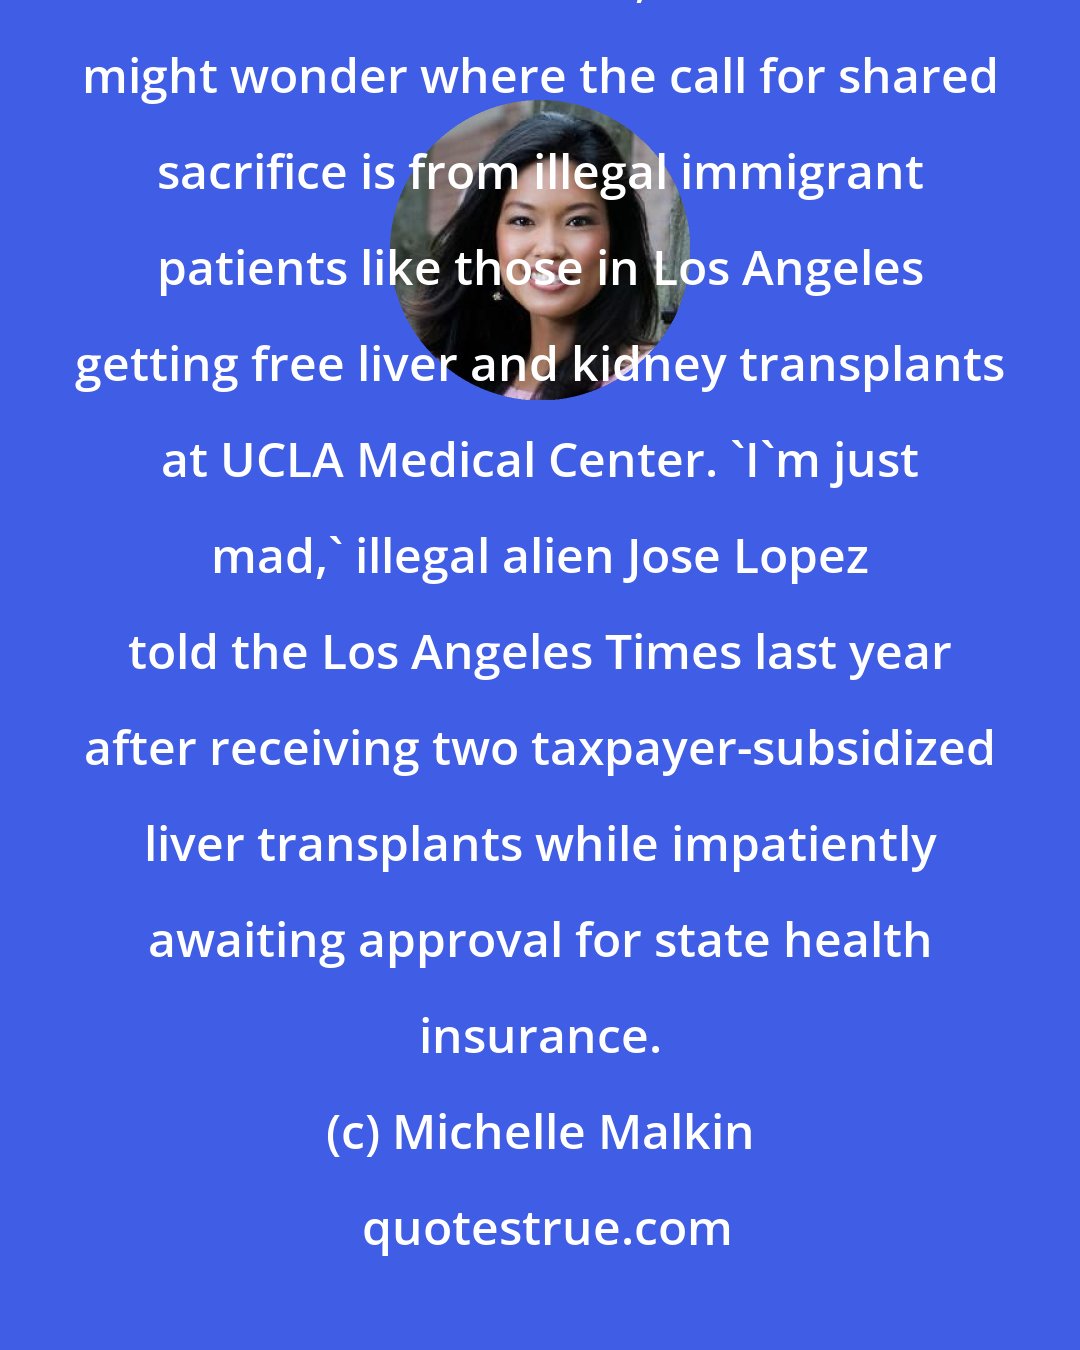 Michelle Malkin: At a time when Democratic leaders are pushing rationed care in a world of limited resources, Americans might wonder where the call for shared sacrifice is from illegal immigrant patients like those in Los Angeles getting free liver and kidney transplants at UCLA Medical Center. 'I'm just mad,' illegal alien Jose Lopez told the Los Angeles Times last year after receiving two taxpayer-subsidized liver transplants while impatiently awaiting approval for state health insurance.